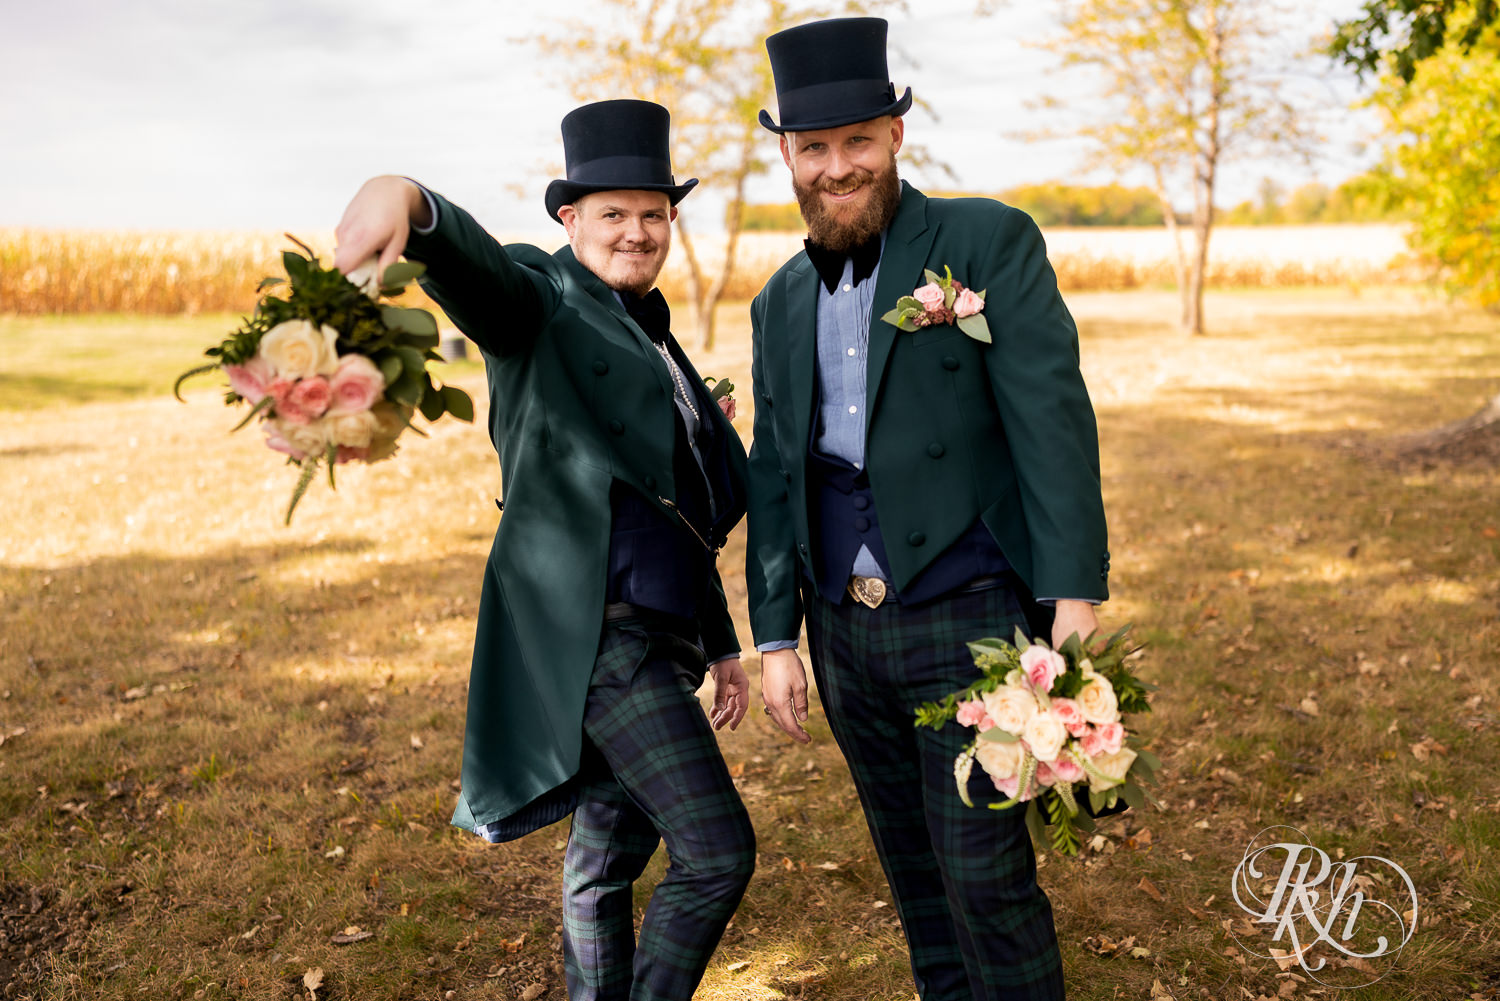 Grooms holding flowers on their wedding day and pointing them at the camera.